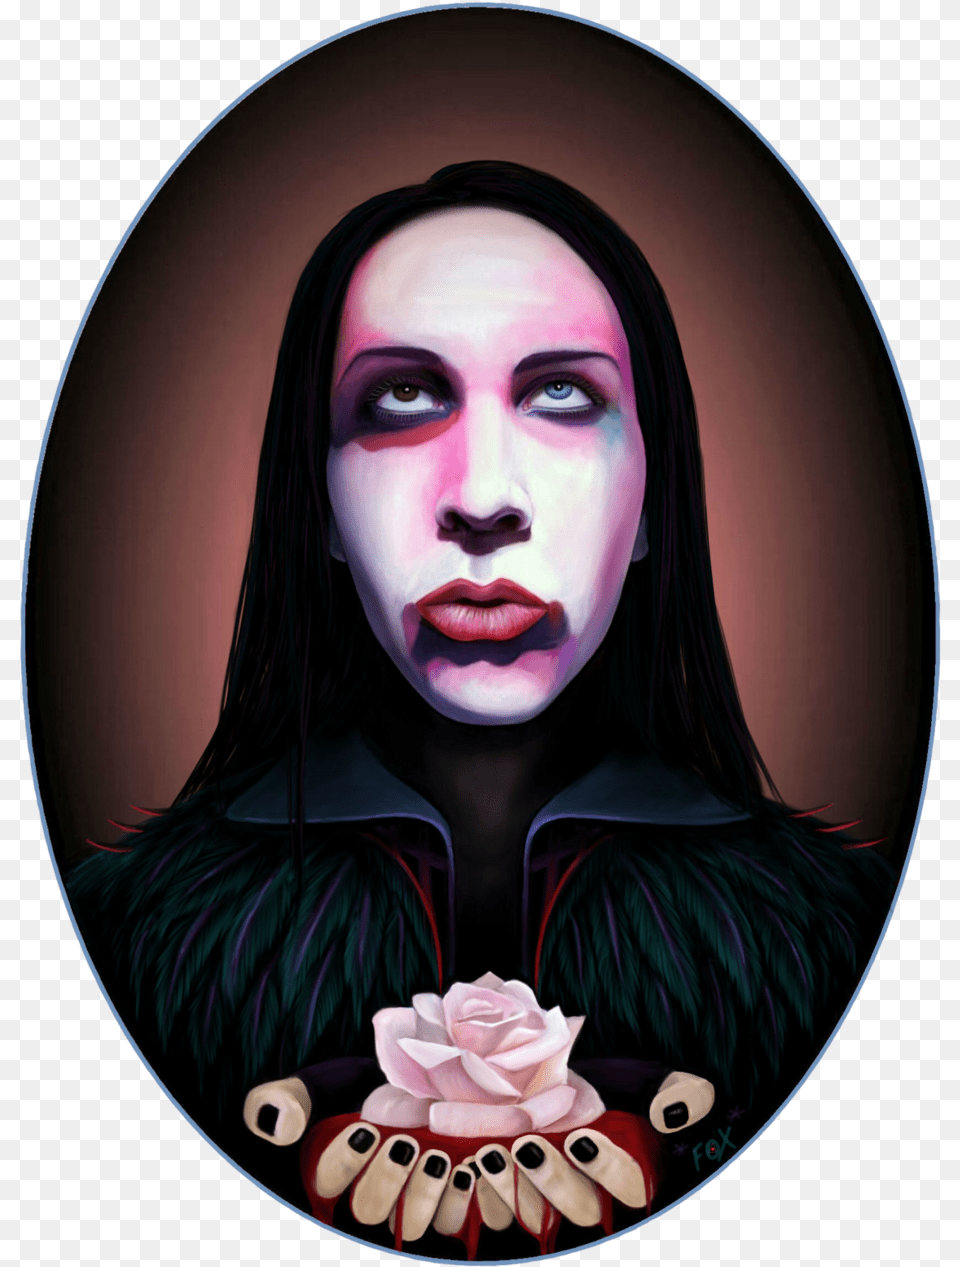 Clip Library Download Disengaged By As Marilyn Manson Marilyn Manson, Adult, Portrait, Photography, Person Png